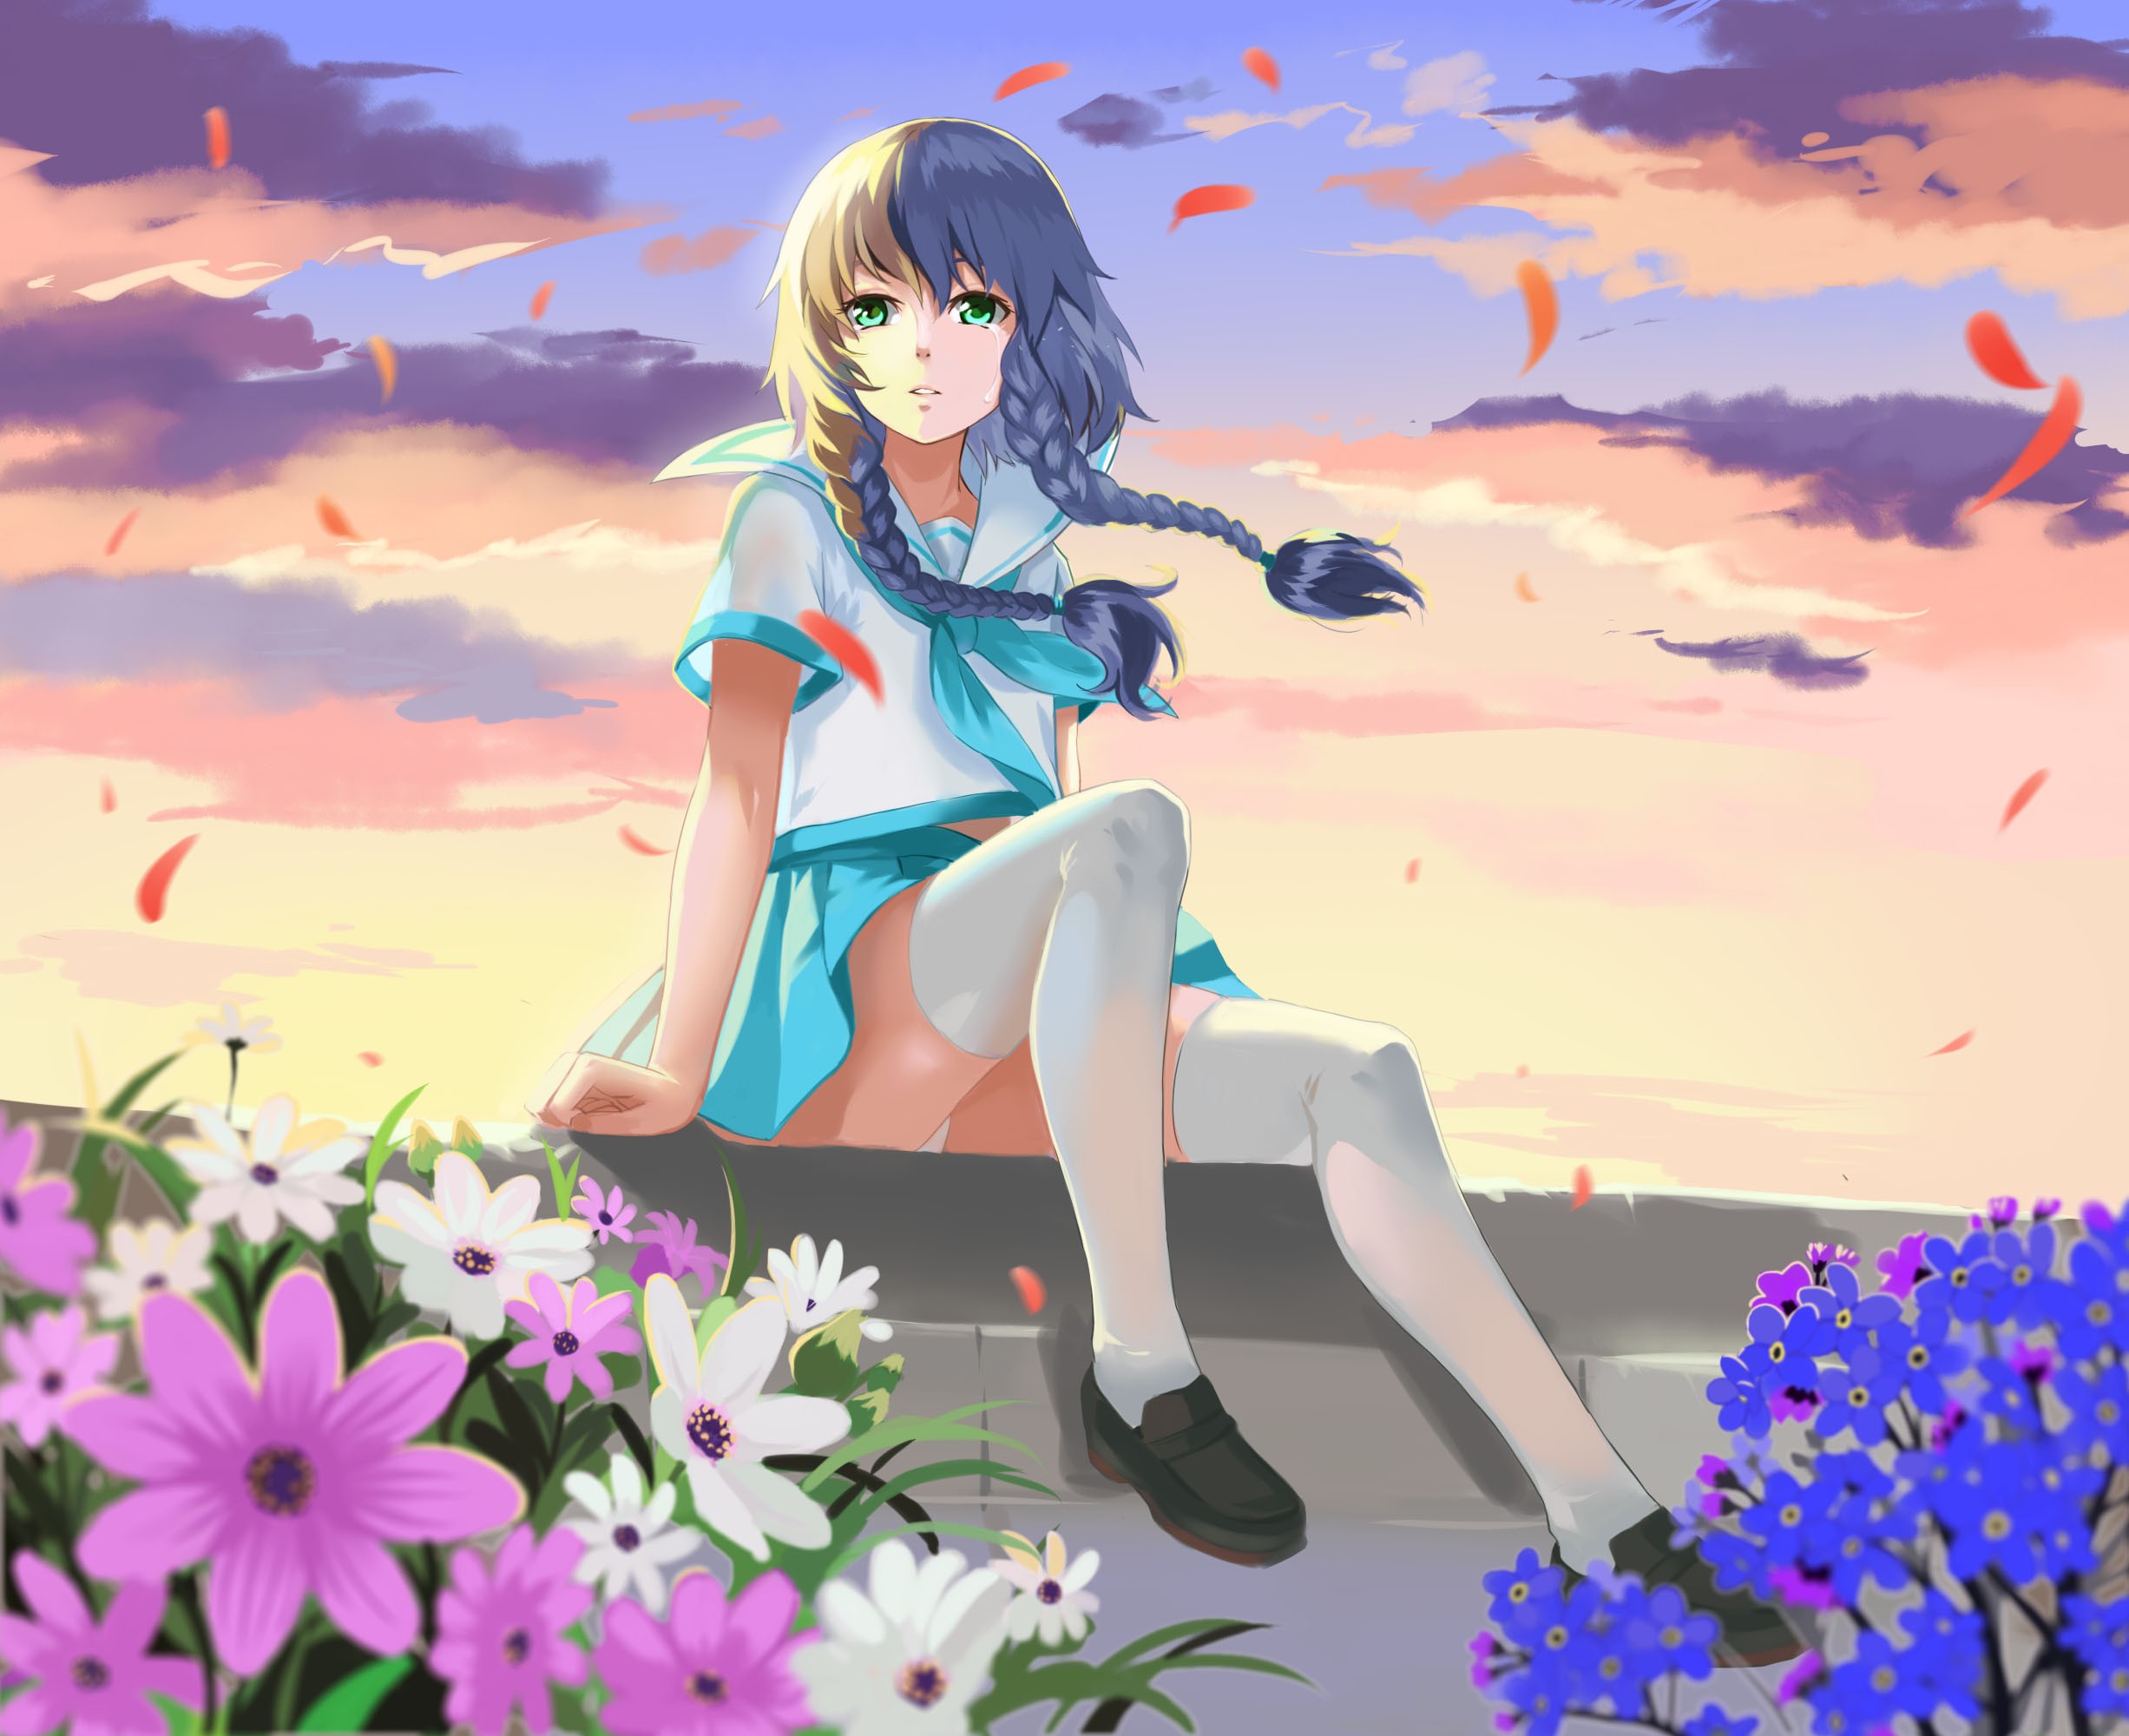 Anime Anime Girls Vocaloid Vocaloid China Luo Tianyi Aqua Eyes Flowers Gray Hair Tears Thigh Highs 2453x2000